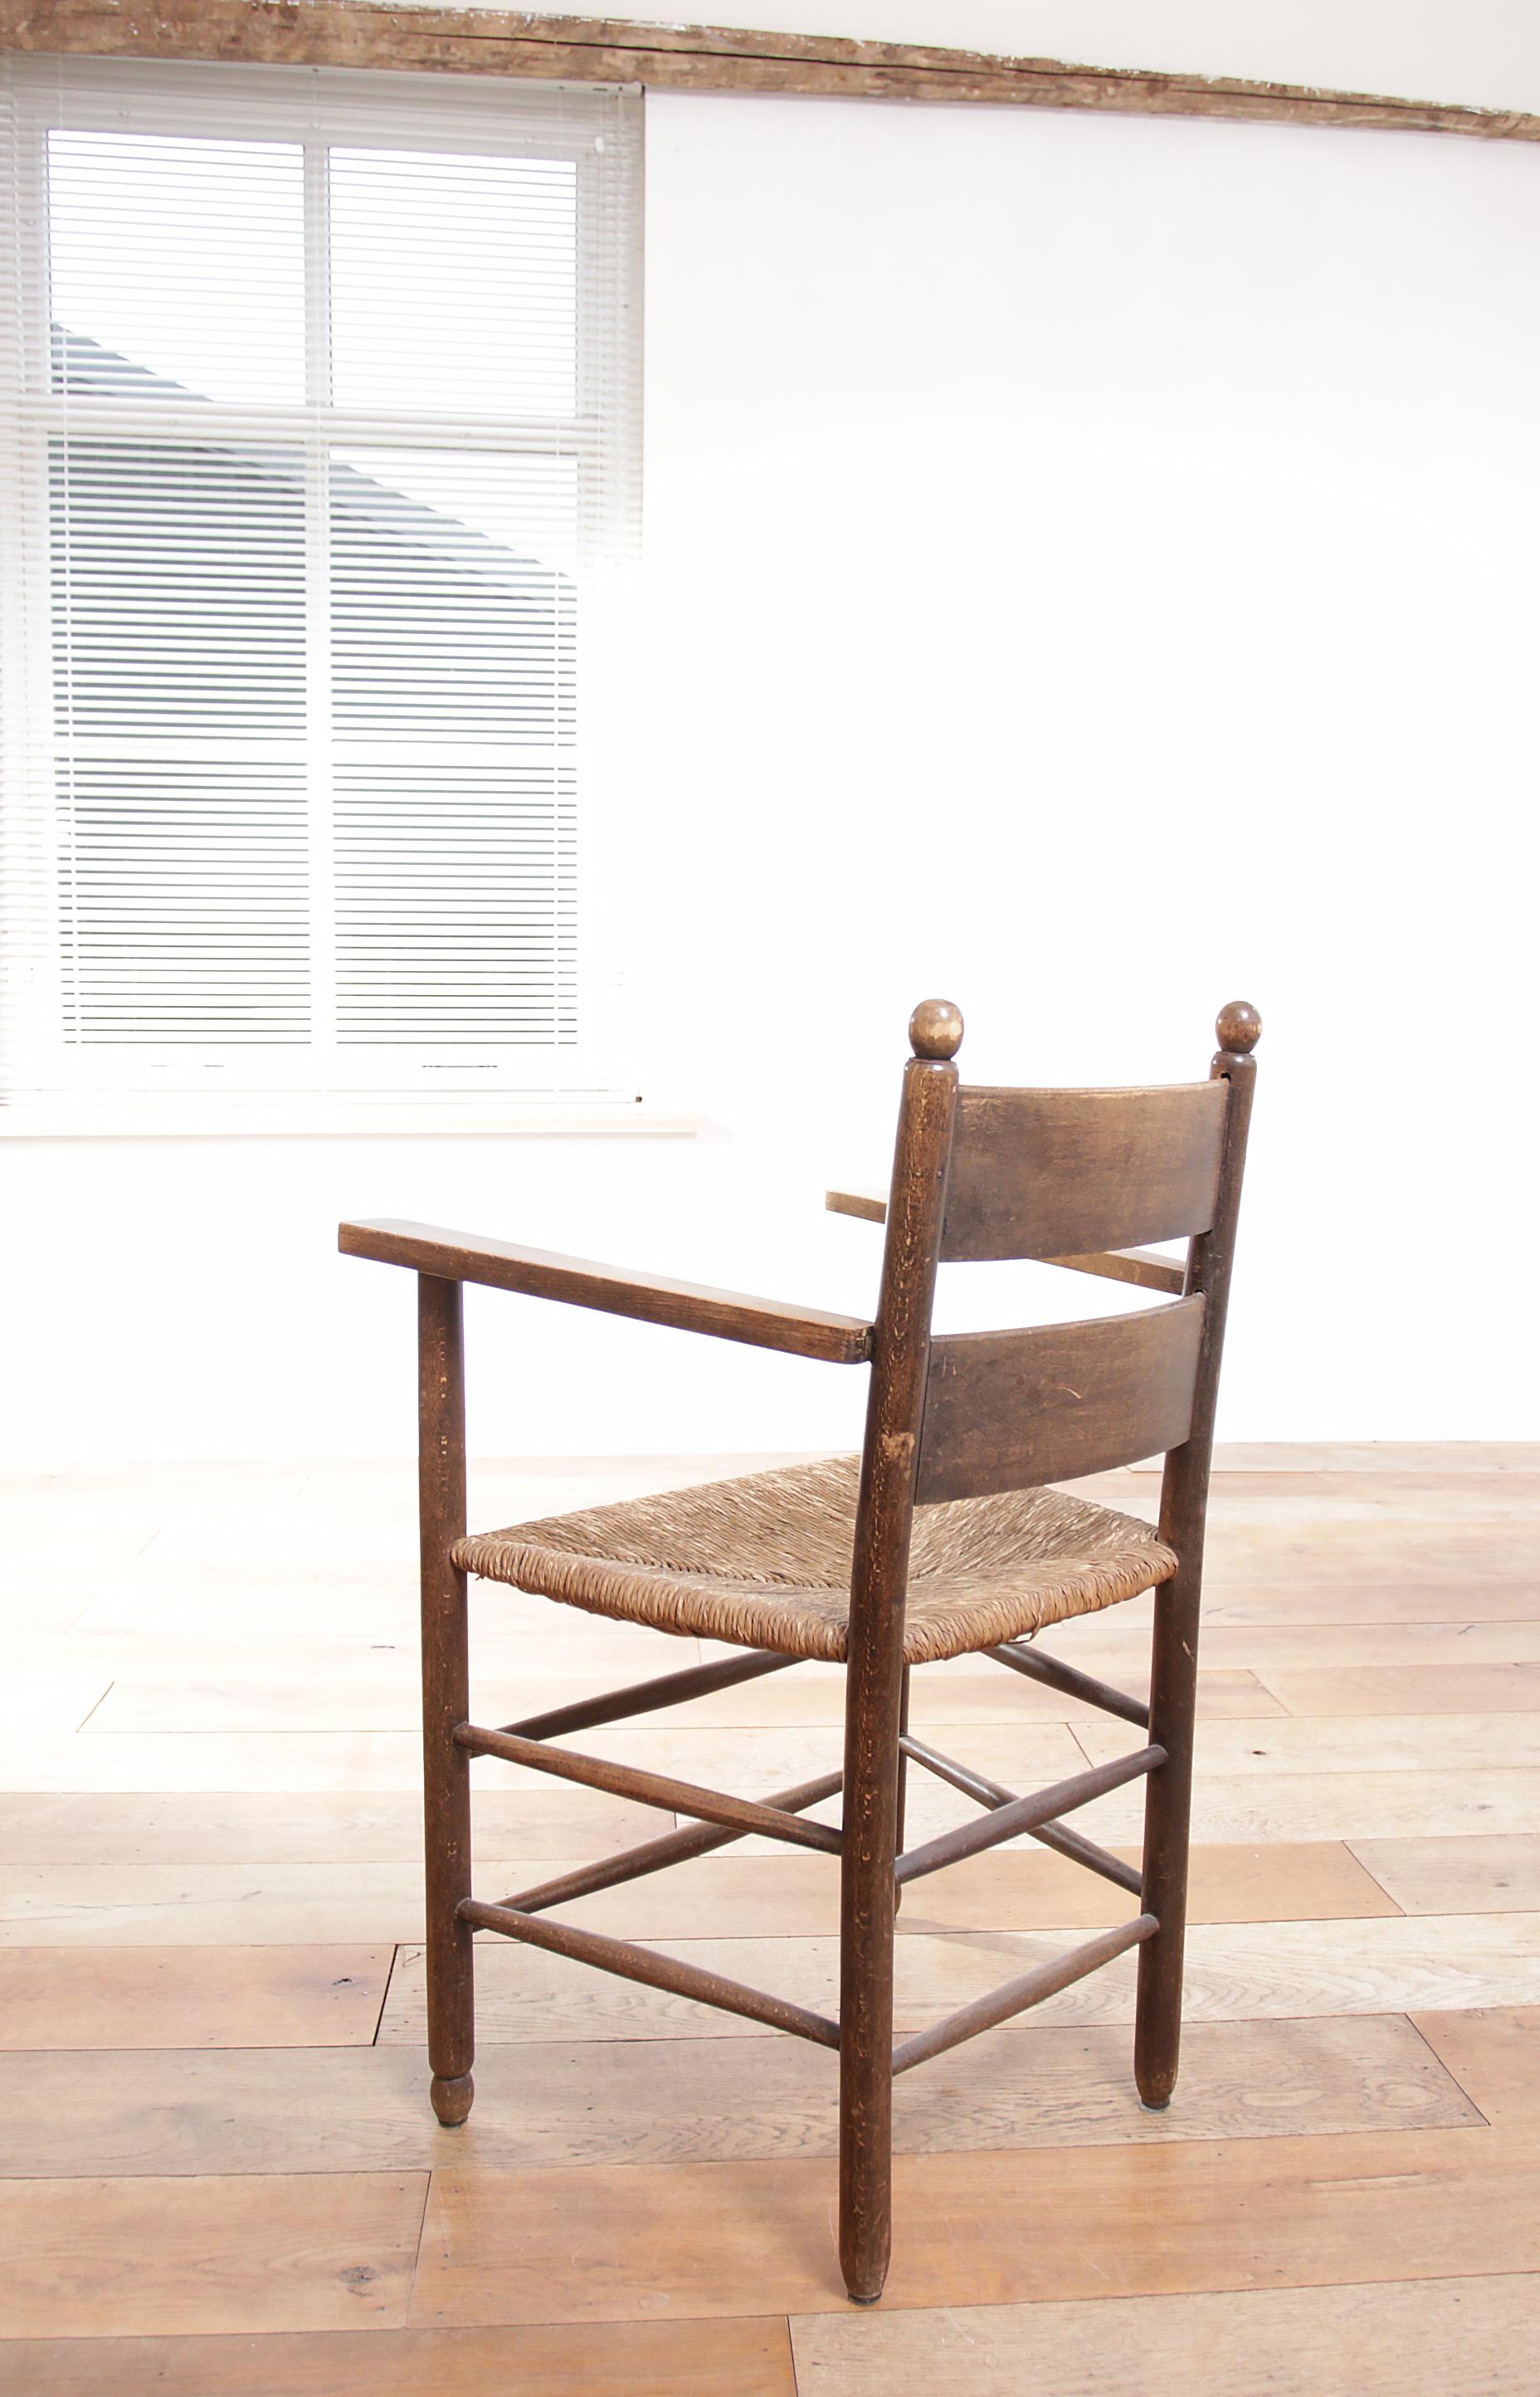 Beautiful armchair from the 1930s made of solid oak with a wicker woven seat.
Fit perfectly with the style of designers such as Charlotte Perriand and Charles Dudouyt.
Comfortable and a very nice warm appearance due to the use of only natural